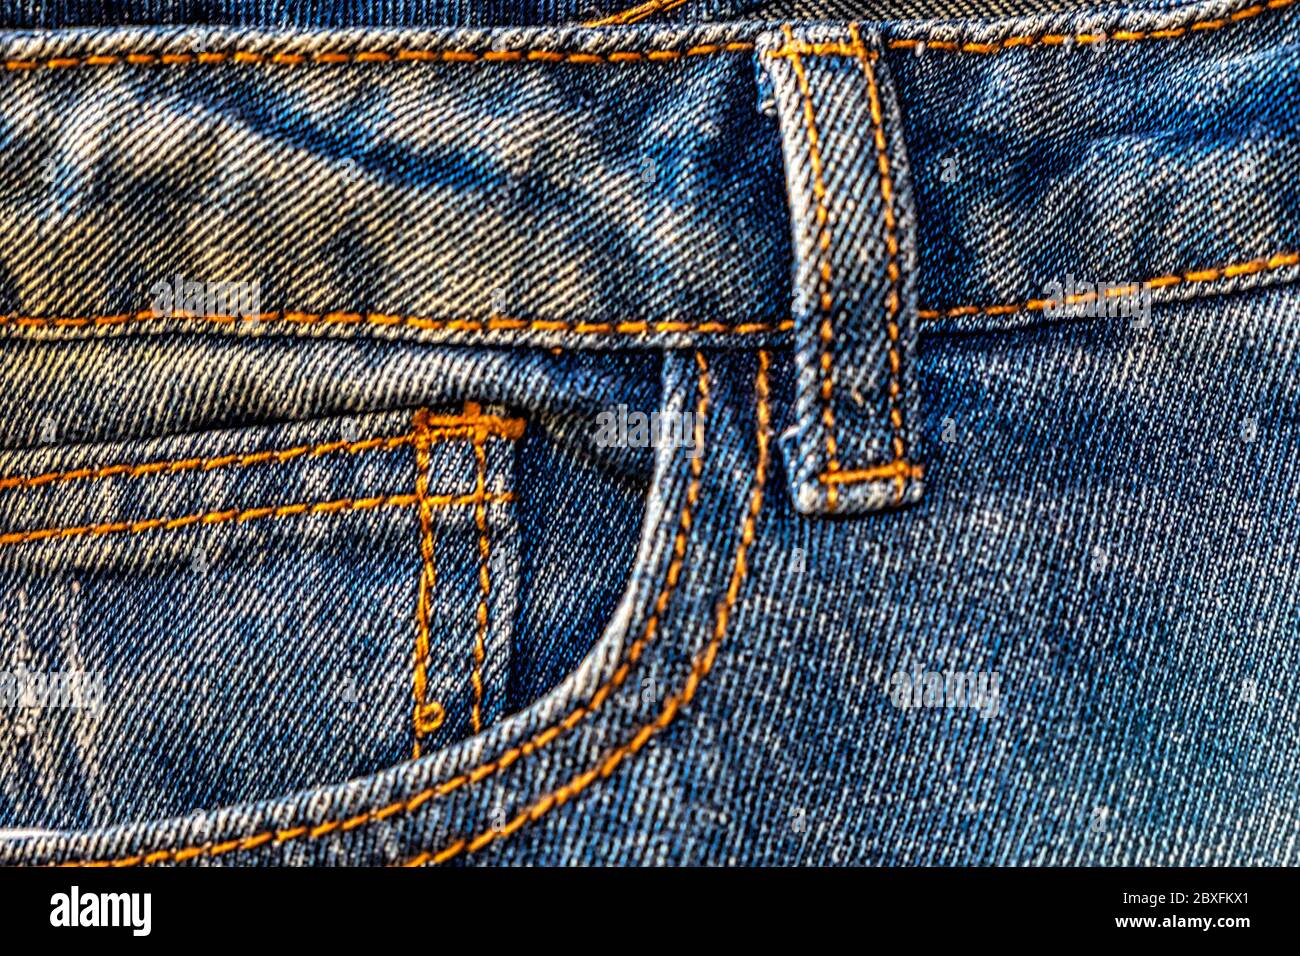 Blue Bleached Jeans Watch Pocket Design Details without Rivets and Seams  Close Up View Stock Photo - Alamy